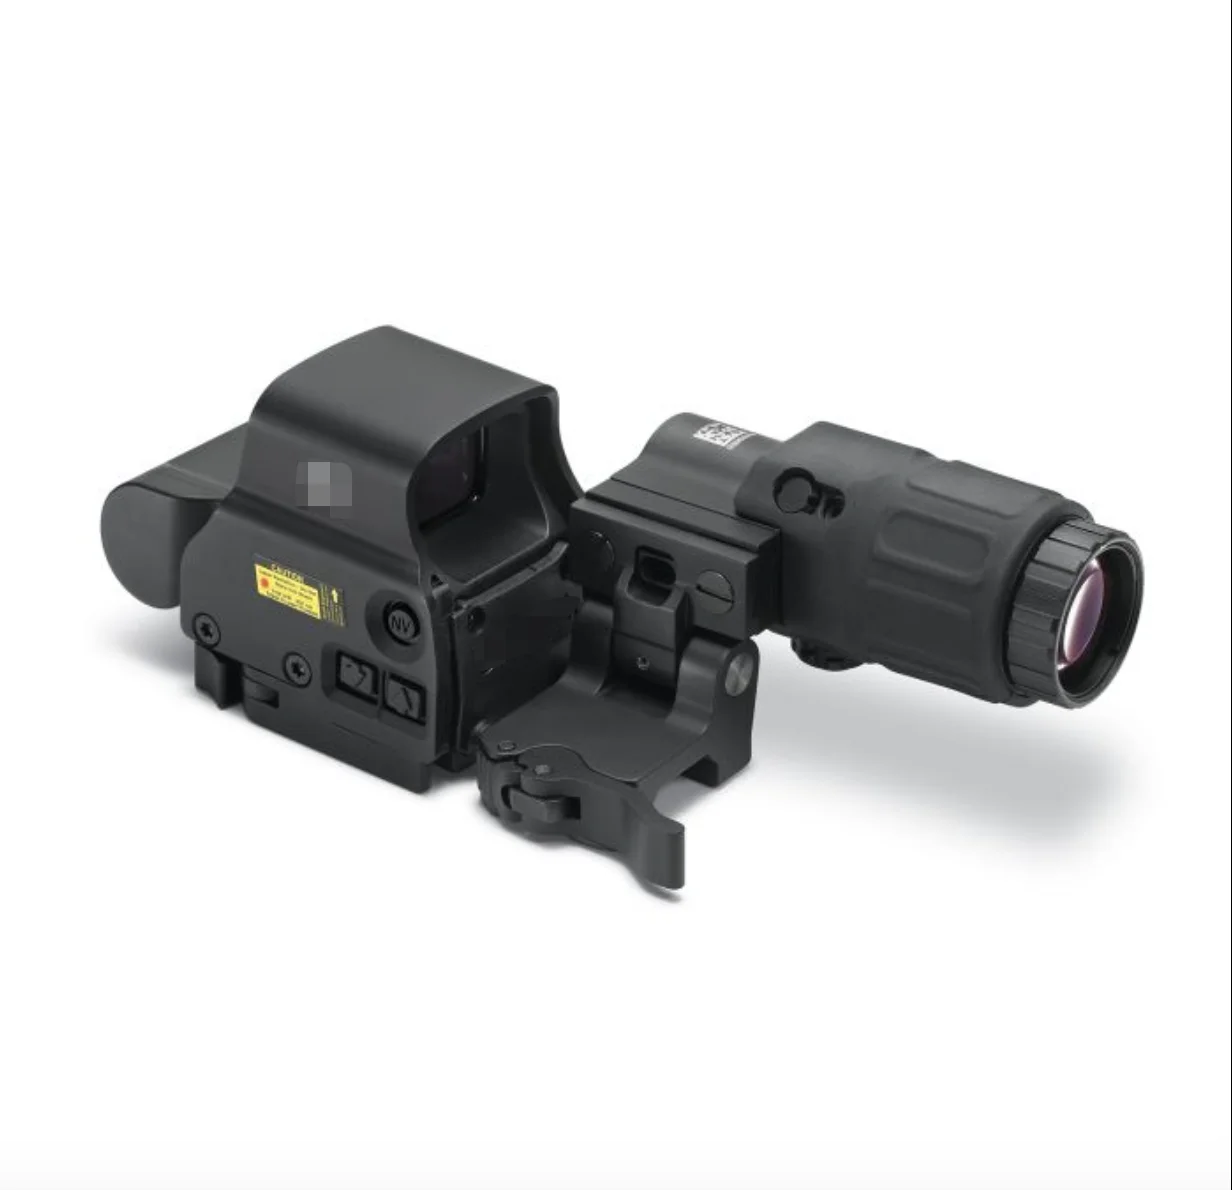 

Tactical 558 Red Dot Sight+g33 Multiplier Airsoft Rifle Optical Sight 3x Magnifier Holographic Scope Hunting Reflex Sights, Matte black